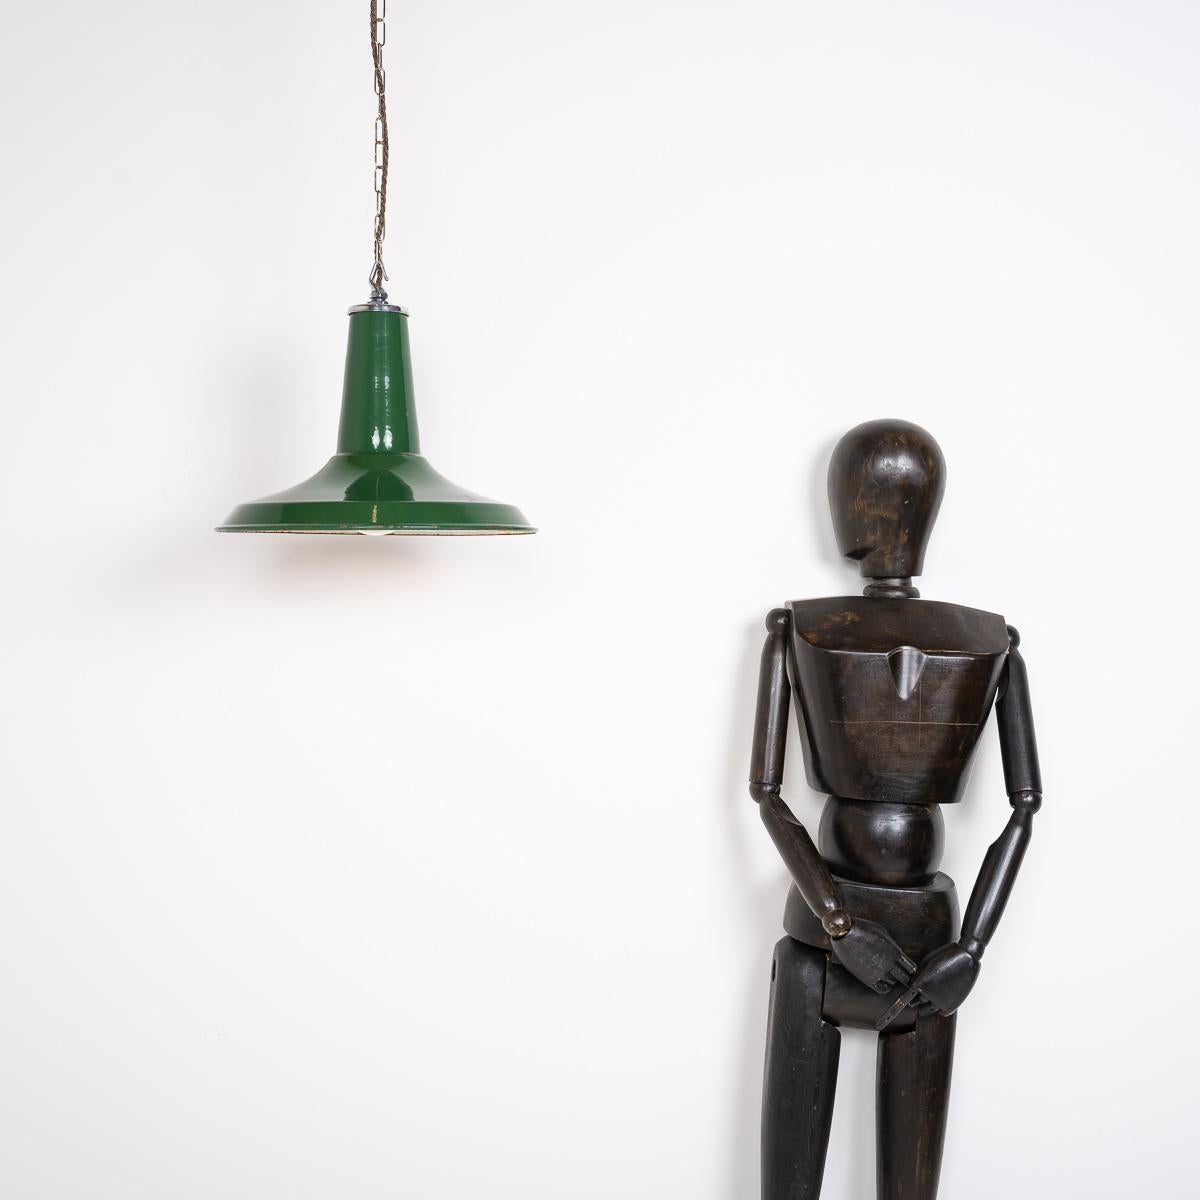 Reclaimed Green Enamel Industrial Lights by F W Thorpe Ltd

Sold as a set of three

Salvaged industrial factory pendants in a wonderful form and colour manufactured in Great Britain circa 1950 by Thorlux.

Hard to believe these were designed and